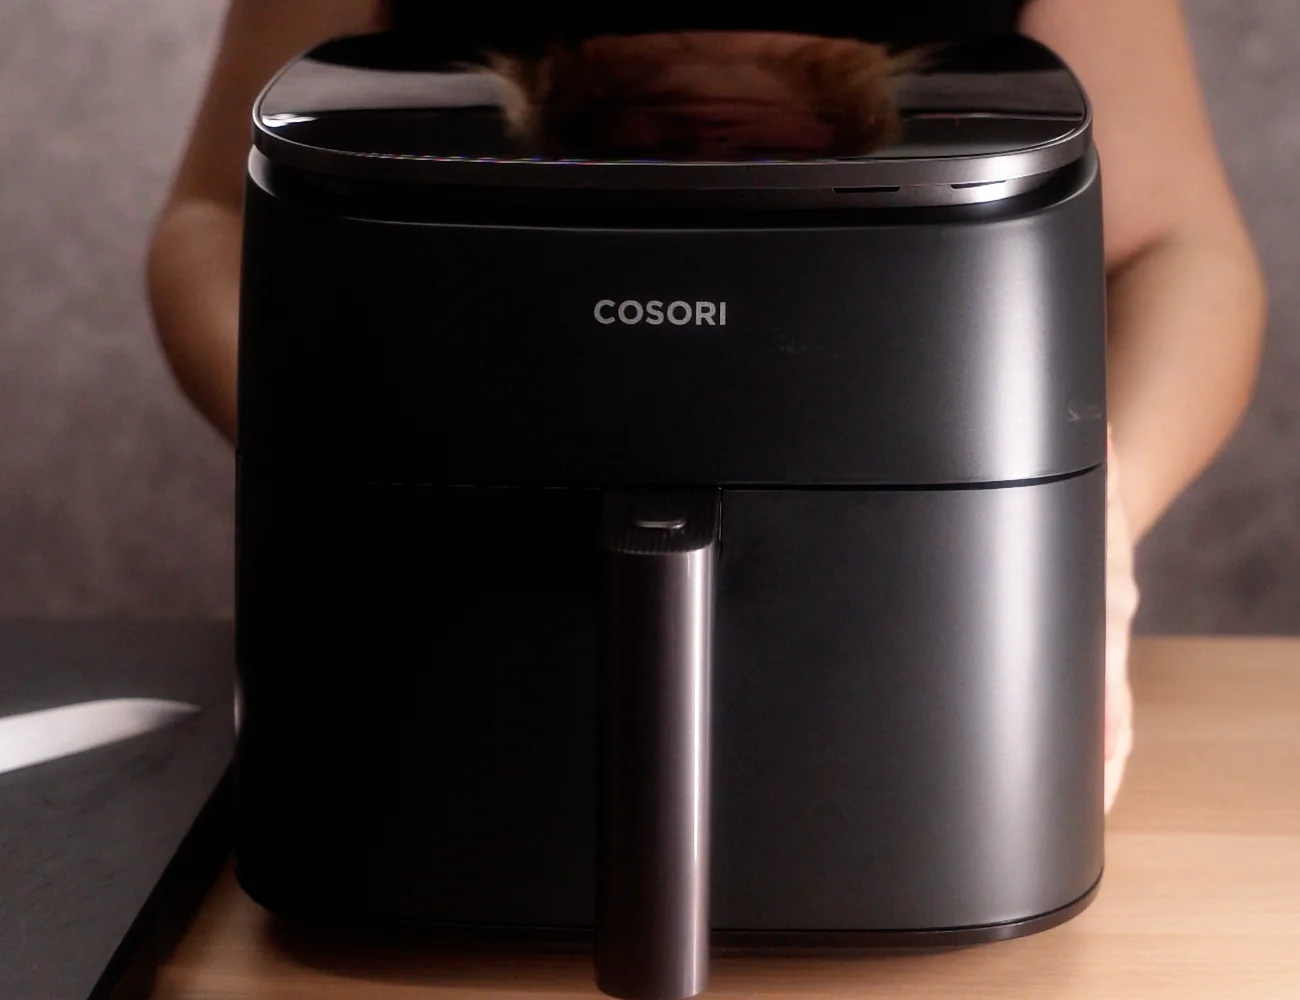 Cosori 6L Turbo Blaze Air Fryer Review: Fast, quality cooking